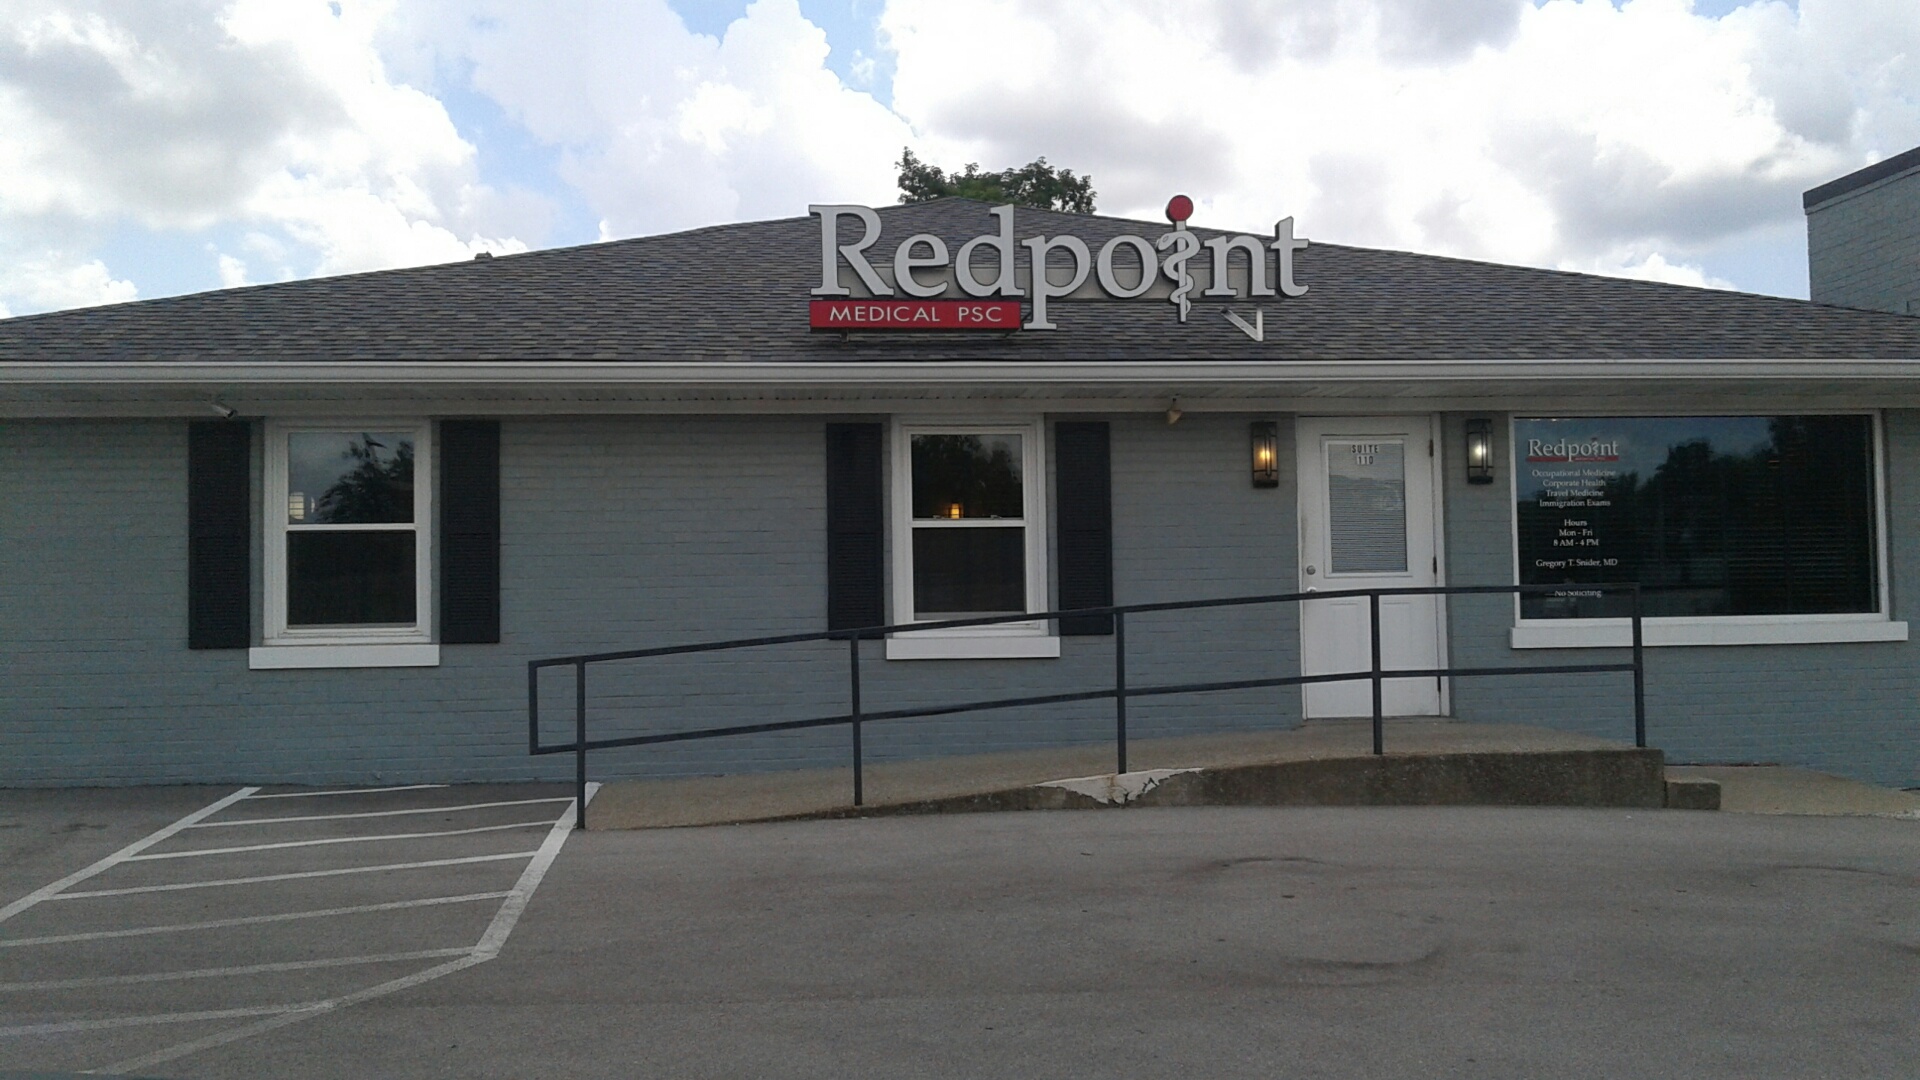 Redpoint Medical PSC